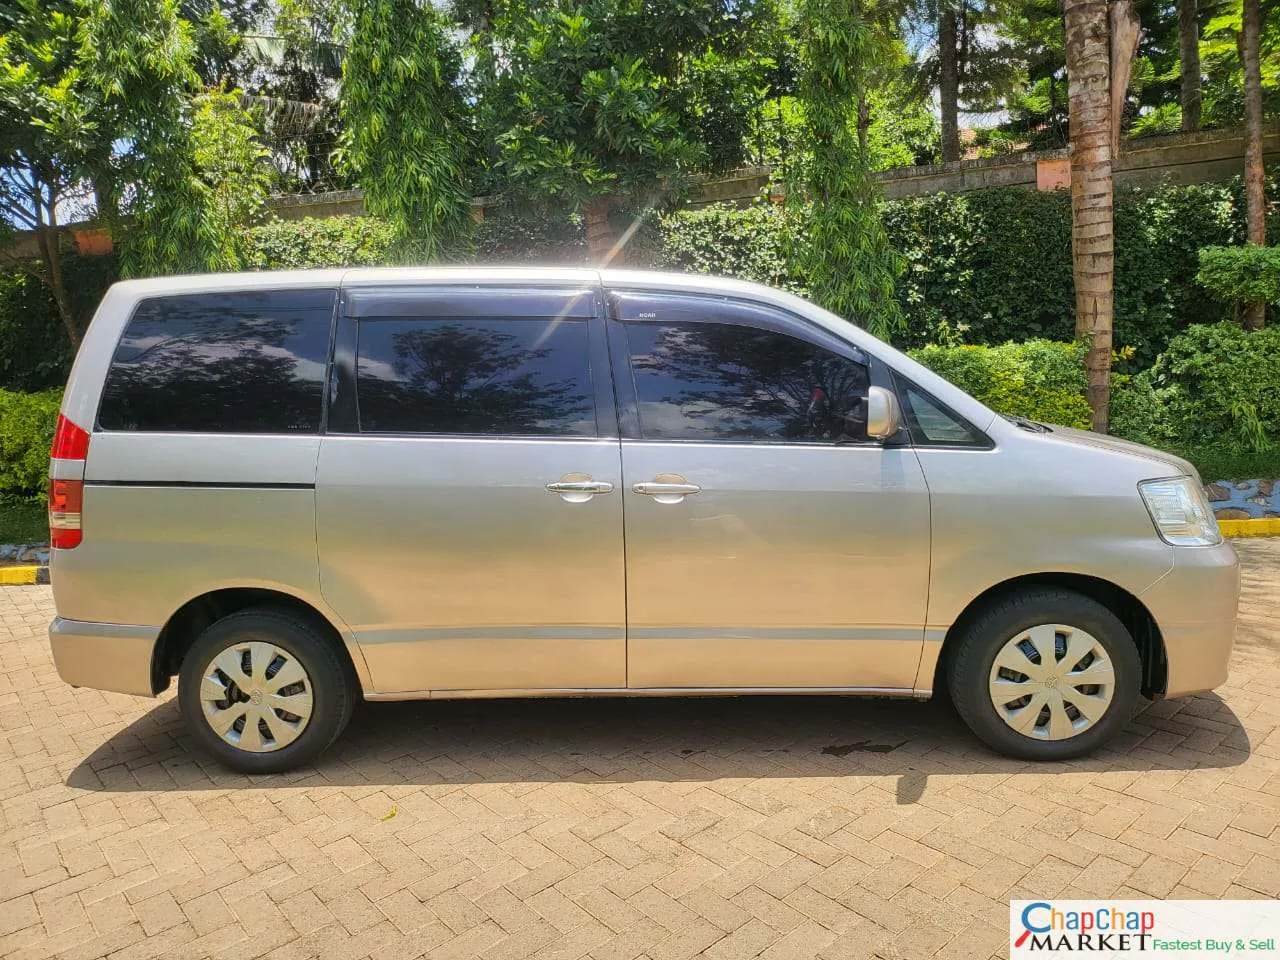 Cars Cars For Sale-Toyota NOAH kenya QUICK SALE You Pay 30% Deposit Trade in OK Toyota Noah for sale in kenya hire purchase installments EXCLUSIVE 10